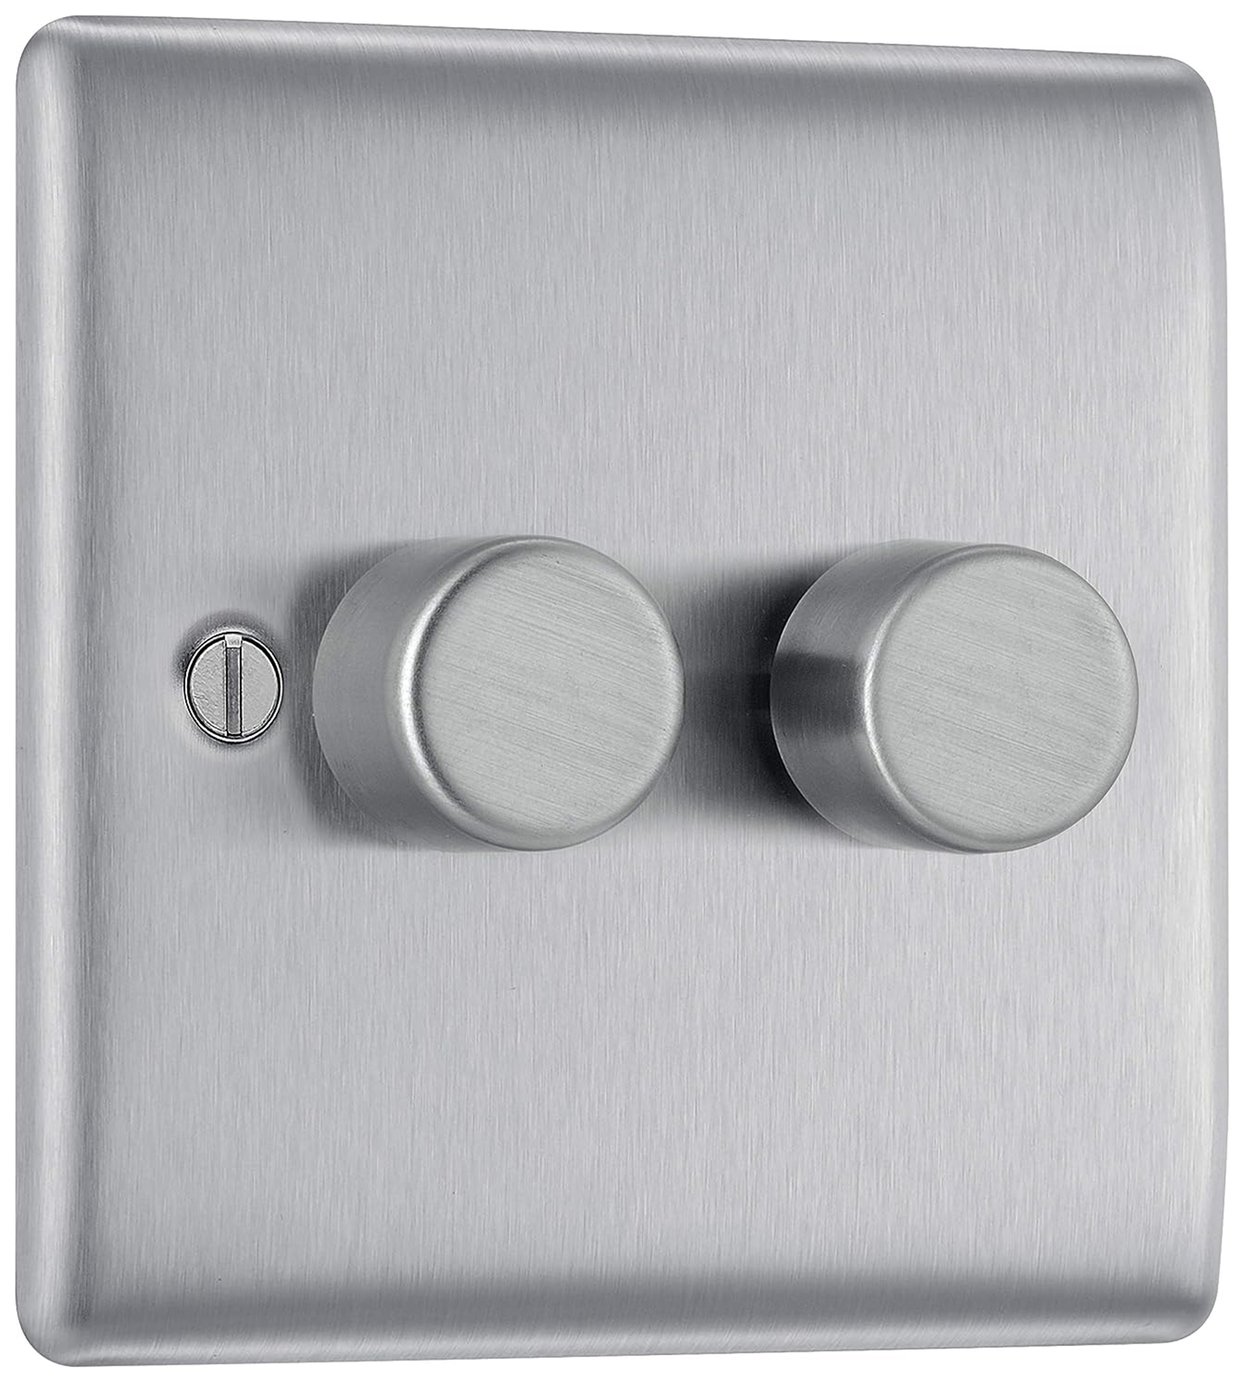 BG 2 Gang 2 Way Dimmer Switch - Stainless Steel